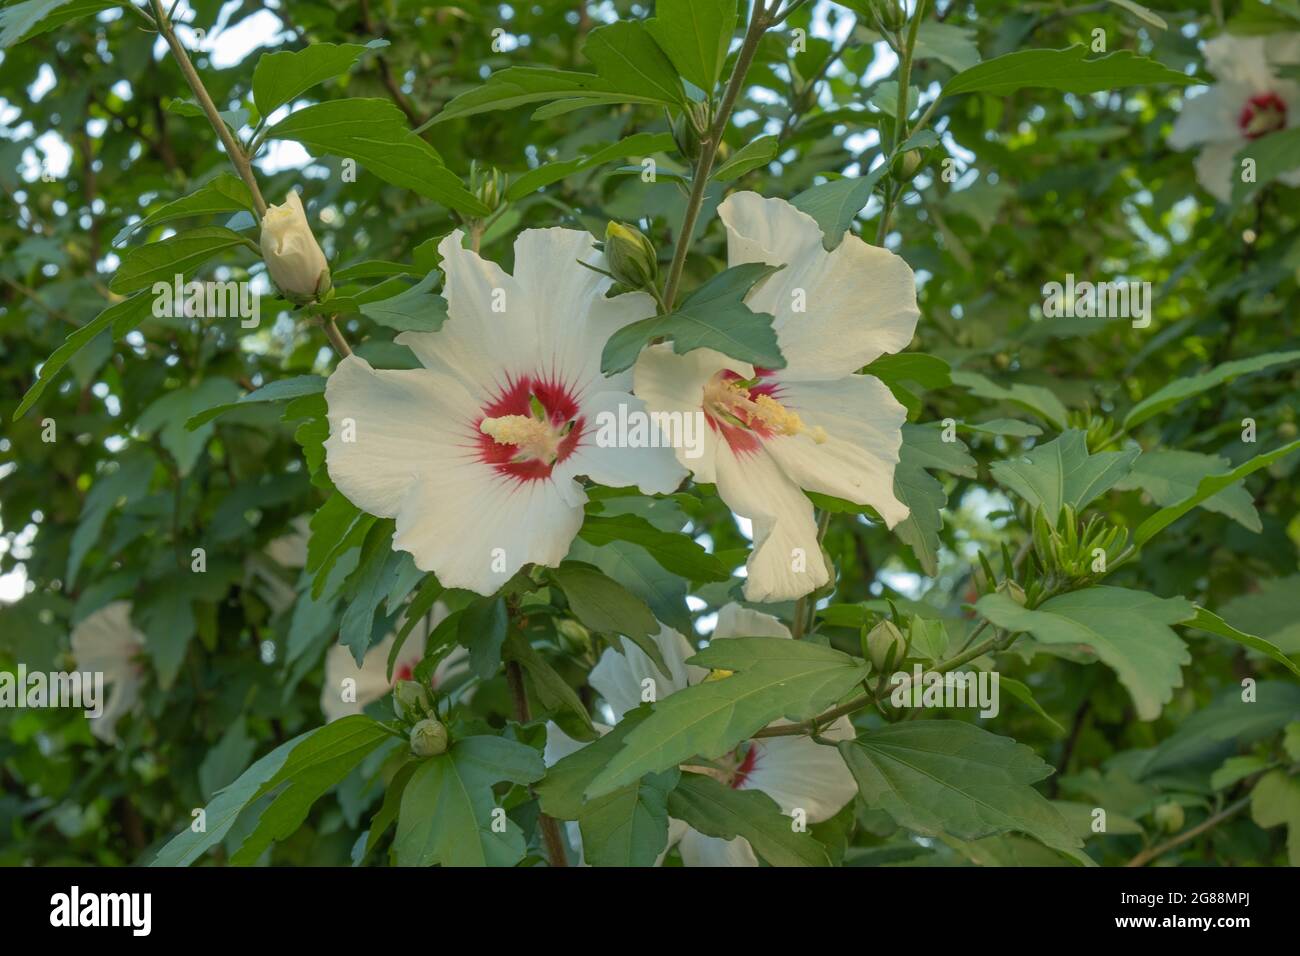 Hibiscus Syrian or Chinese rose, flowers of the Malvaceae family. Flowering Bush with hibiscus flowers. Stock Photo